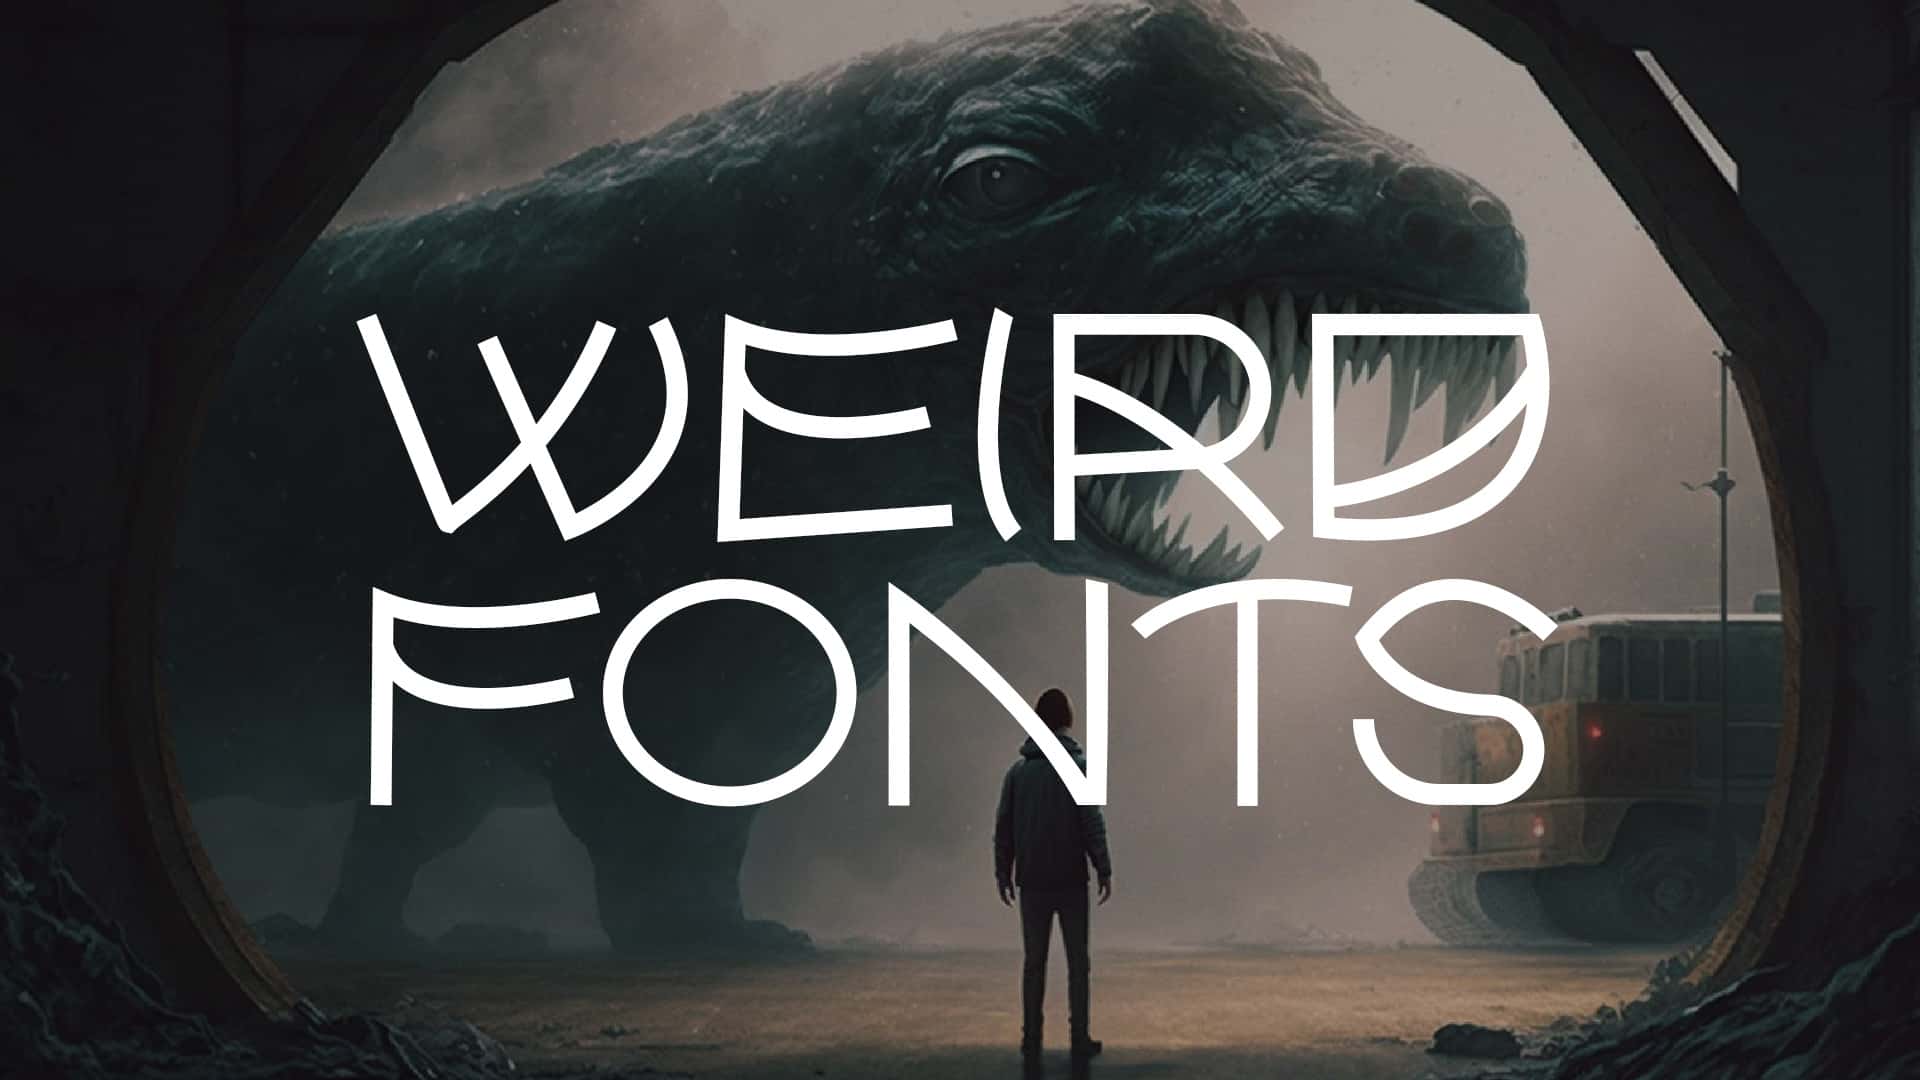 55 Weird Fonts That Will Put a Twist On Your Designs | HipFonts